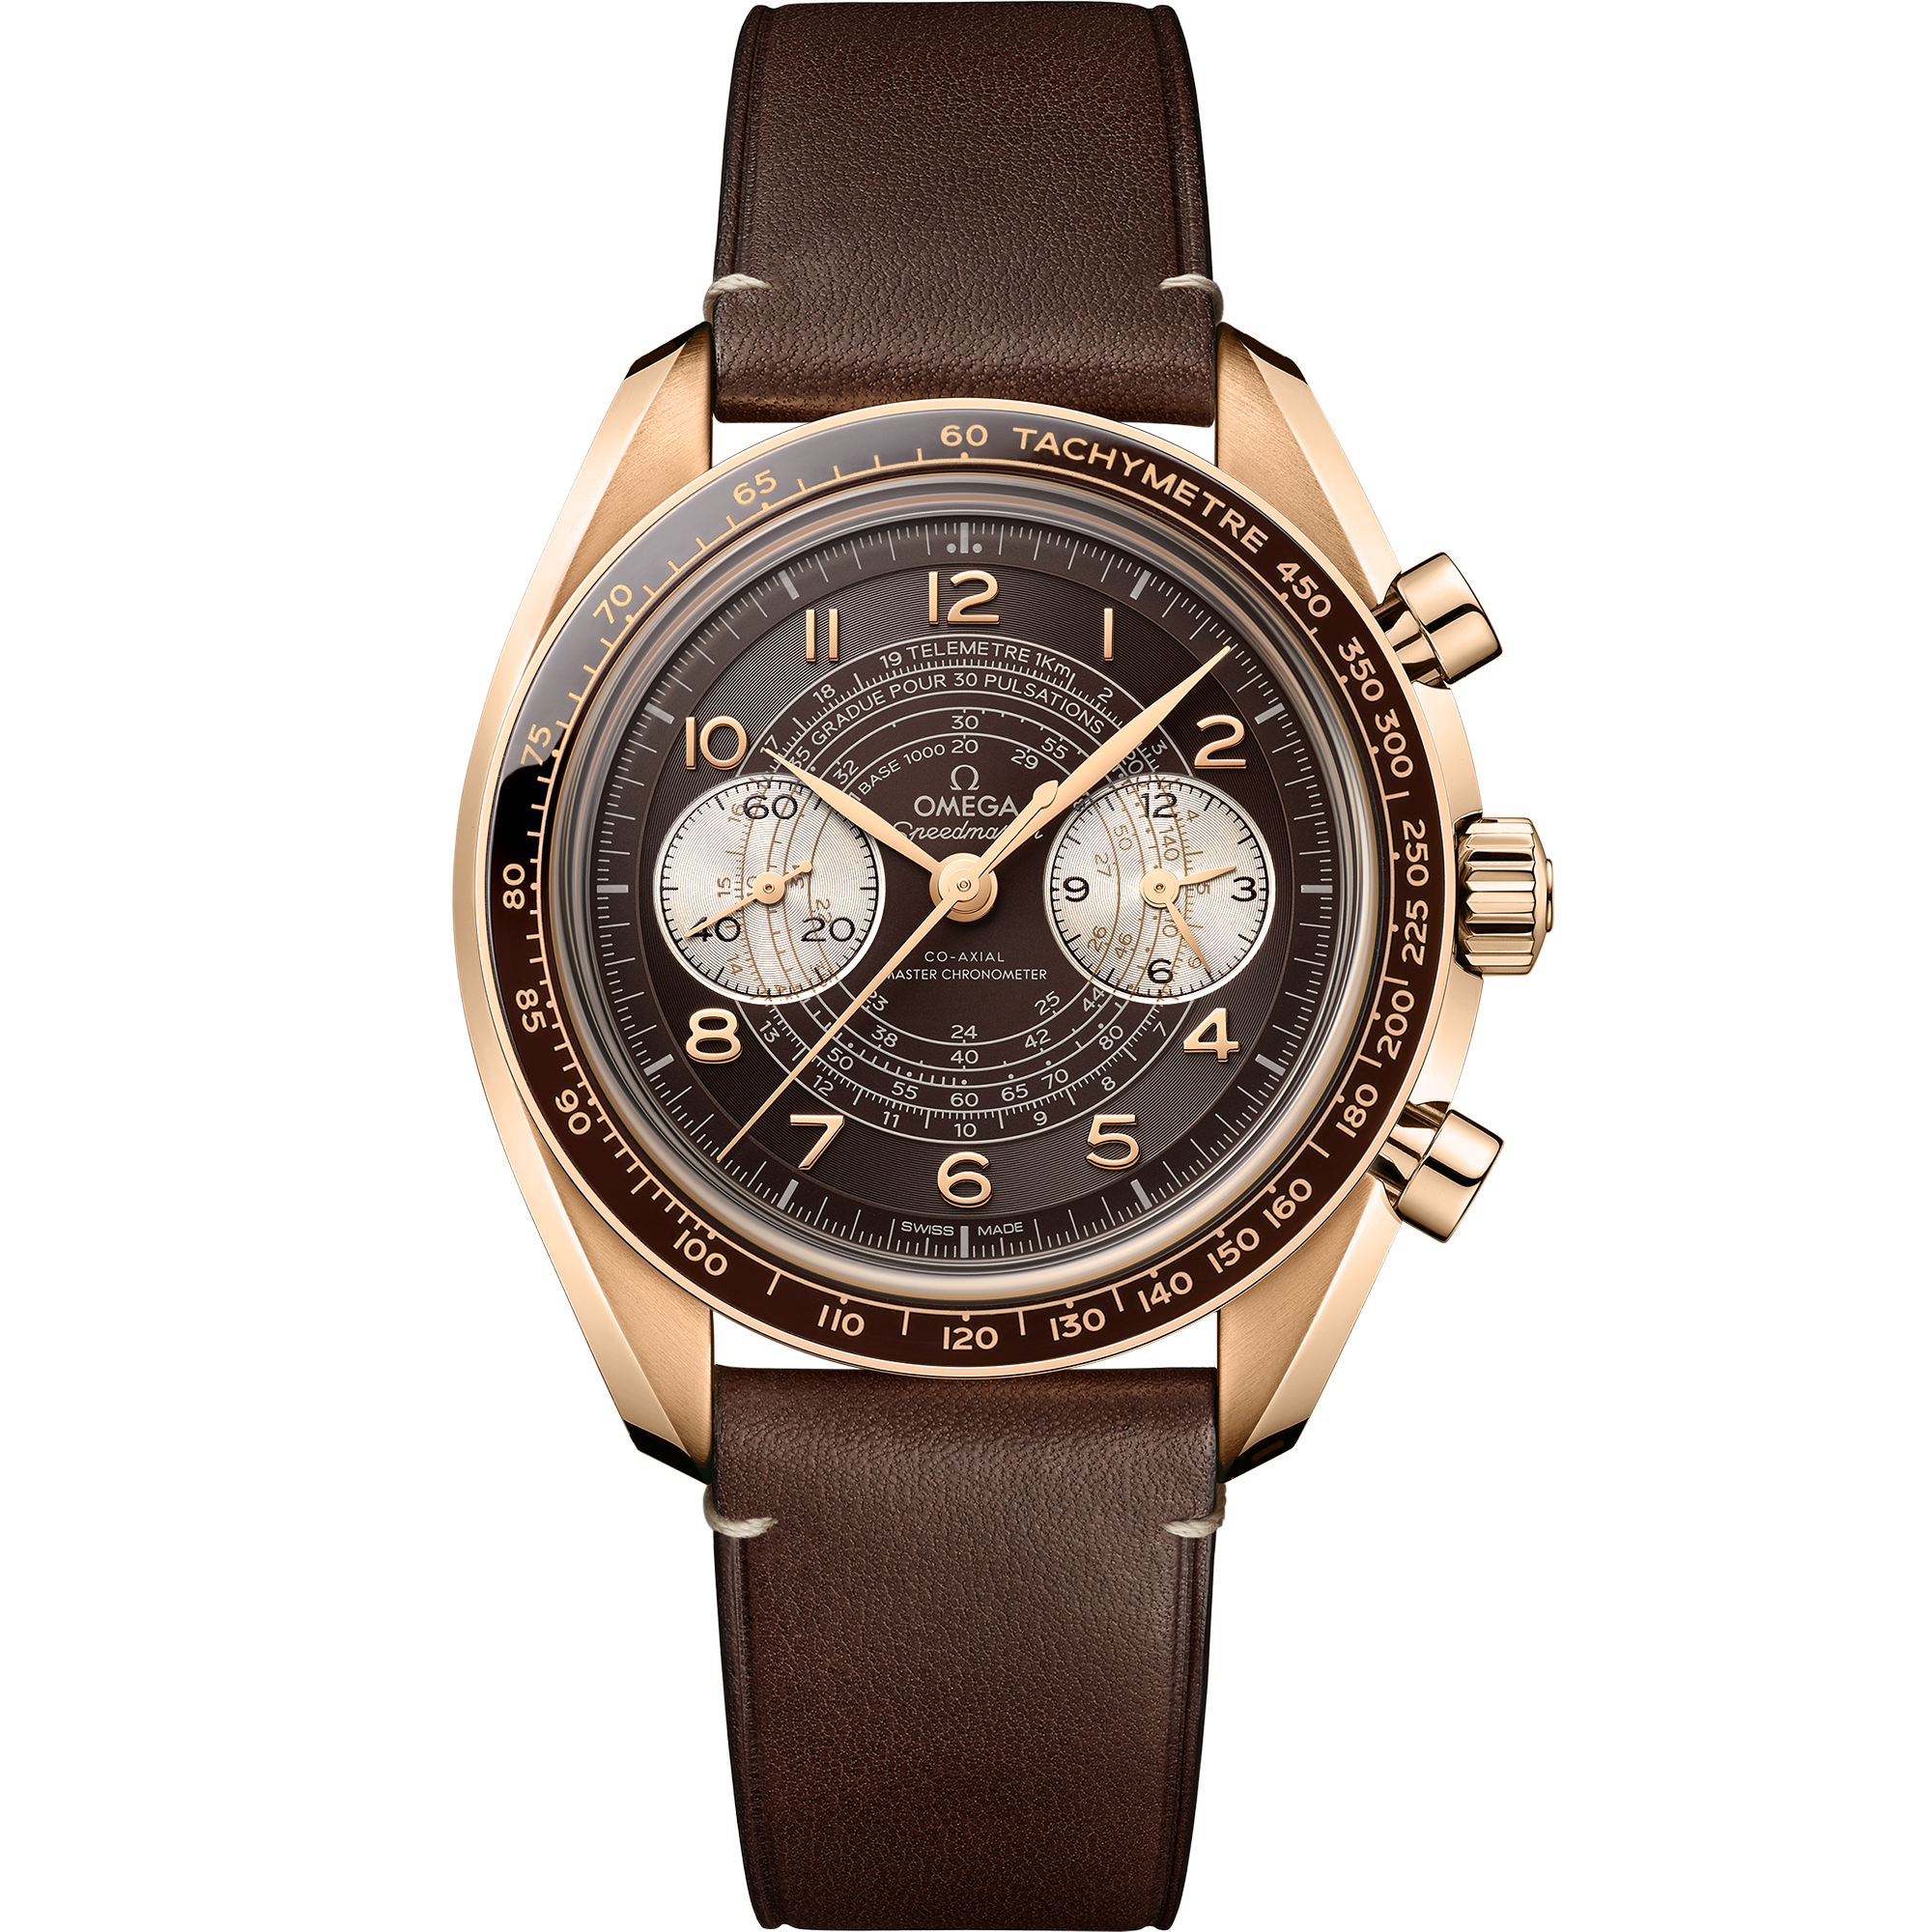 Brown dial watch on Bronze gold case with Leather strap - Speedmaster Chronoscope 43 mm, Bronze gold on leather strap - 329.92.43.51.10.001